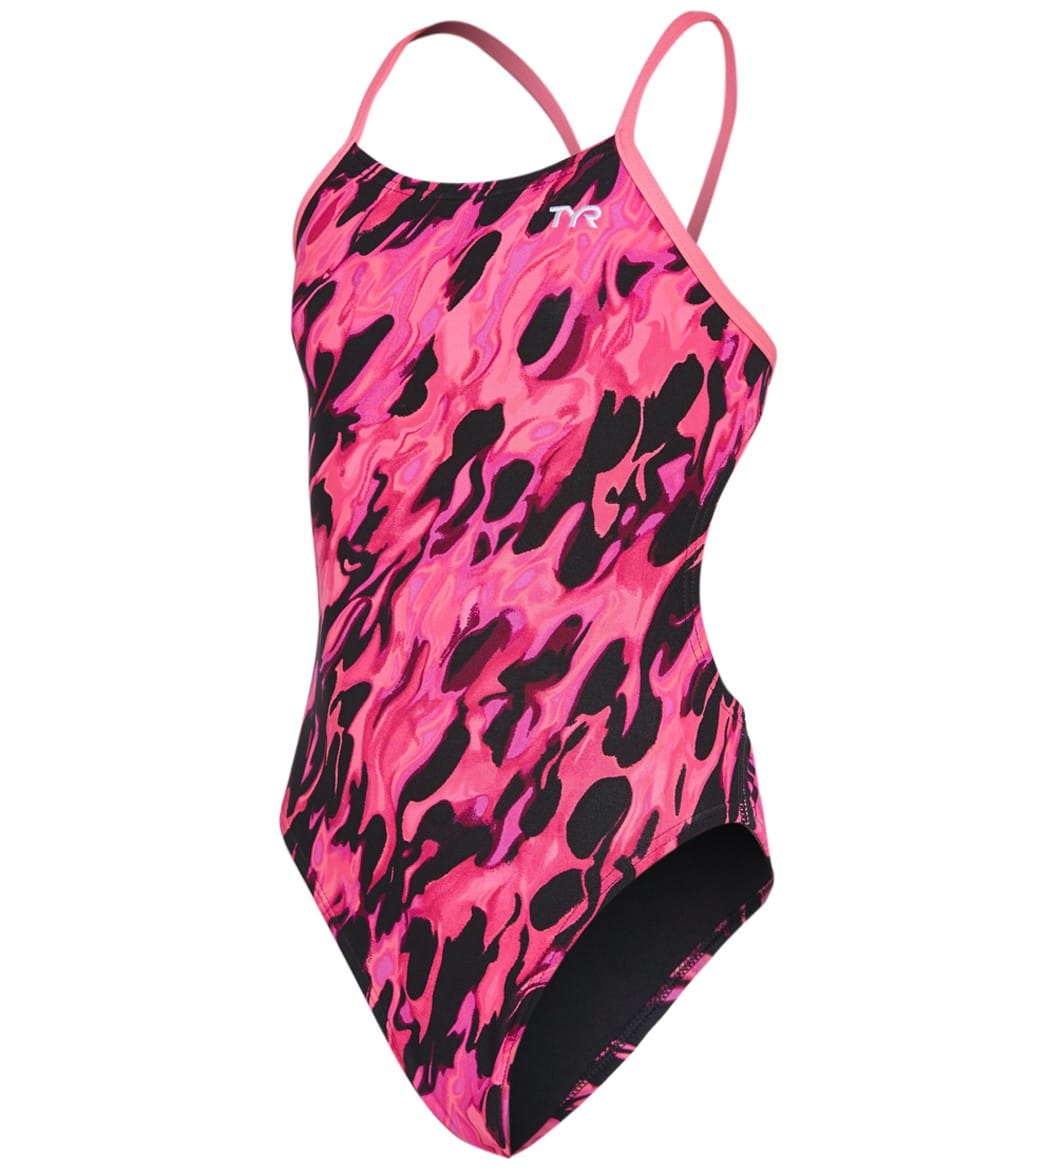 TYR Girls' Draco Cutoutfit One Piece Swimsuit at SwimOutlet.com - Free ...